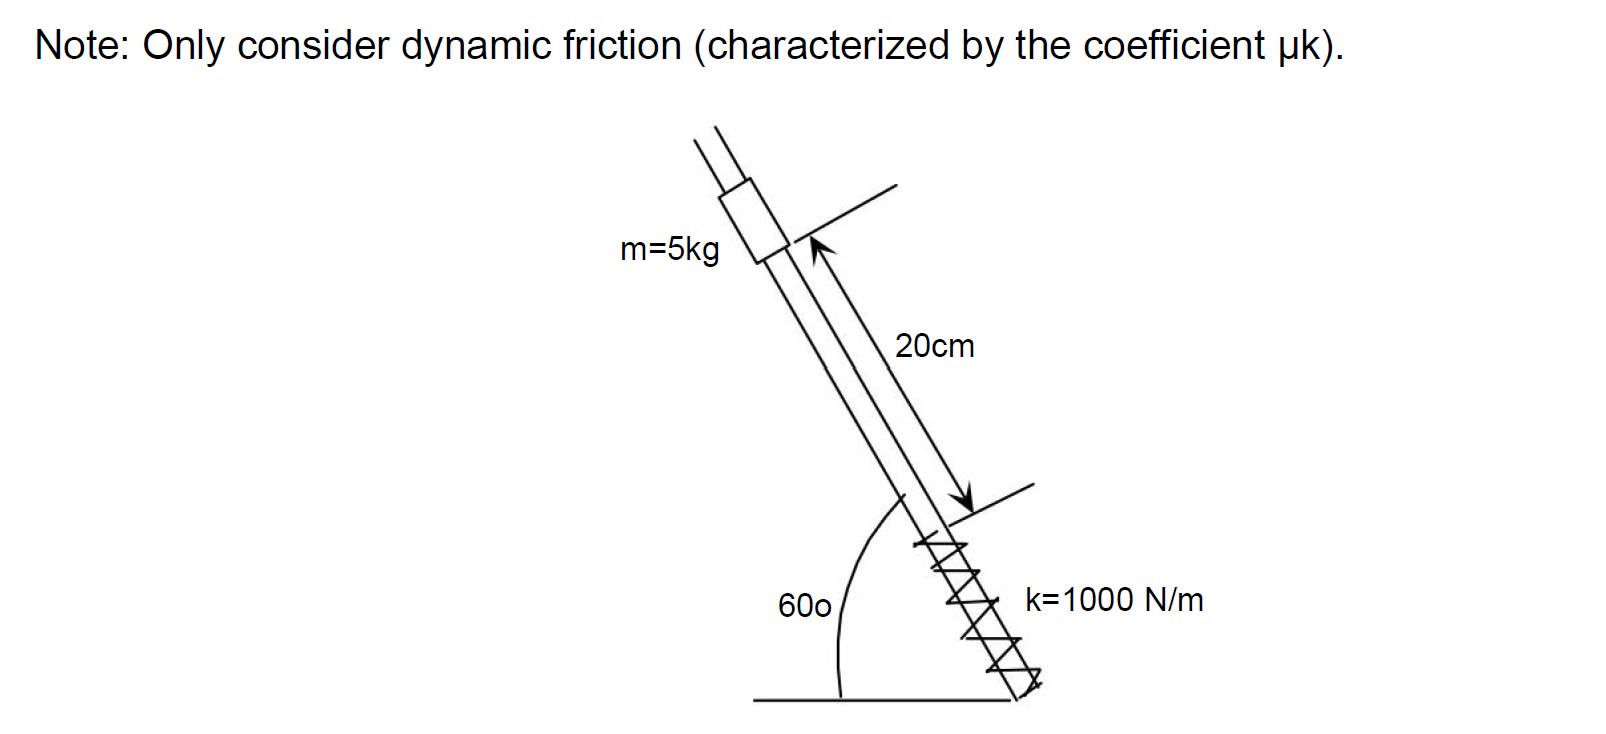 Note: Only consider dynamic friction (characterized by the coefficient uk). m=5kg 600 20cm k=1000 N/m